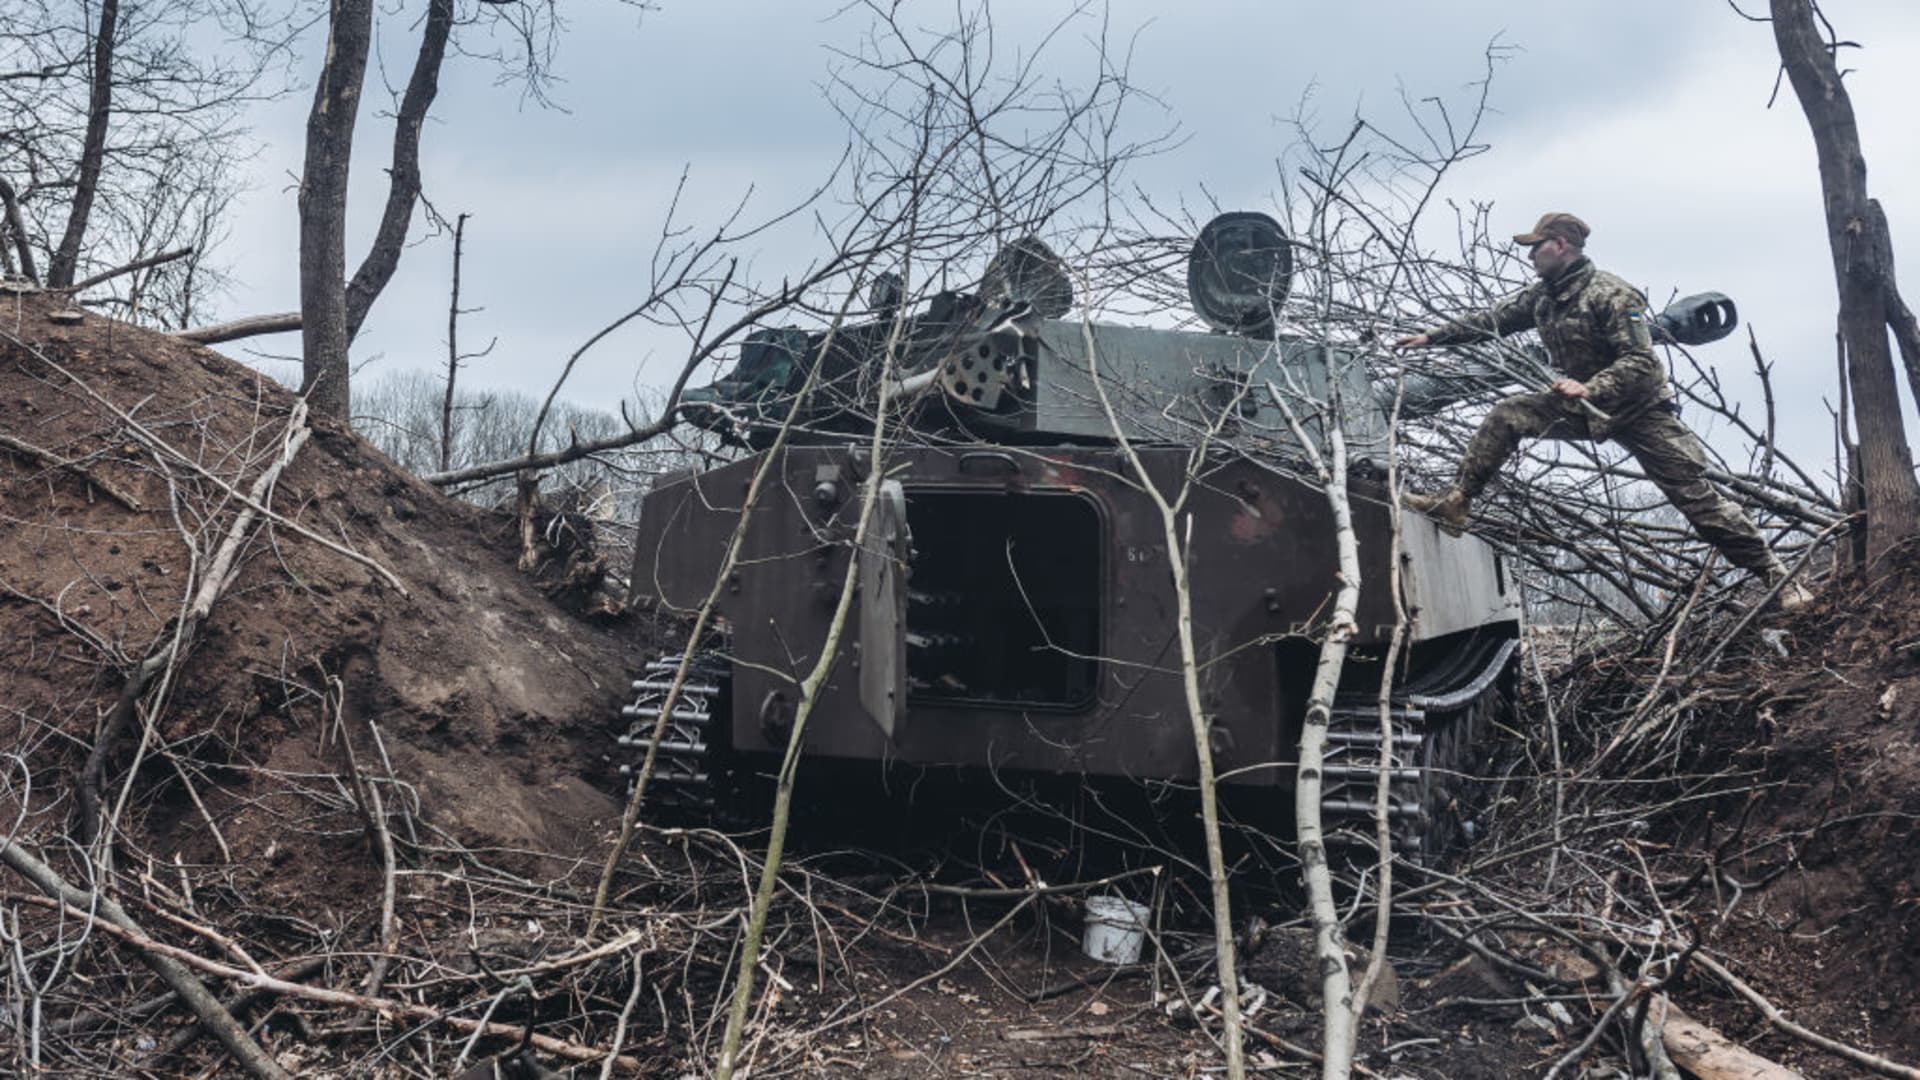 Ukrainian soldiers seen on a tank on the frontline in Donbas, Ukraine on April 12, 2022. Russia has begun the battle for Donbas, which they have been preparing for a long time, Ukrainian President Volodymyr Zelenskyy says.